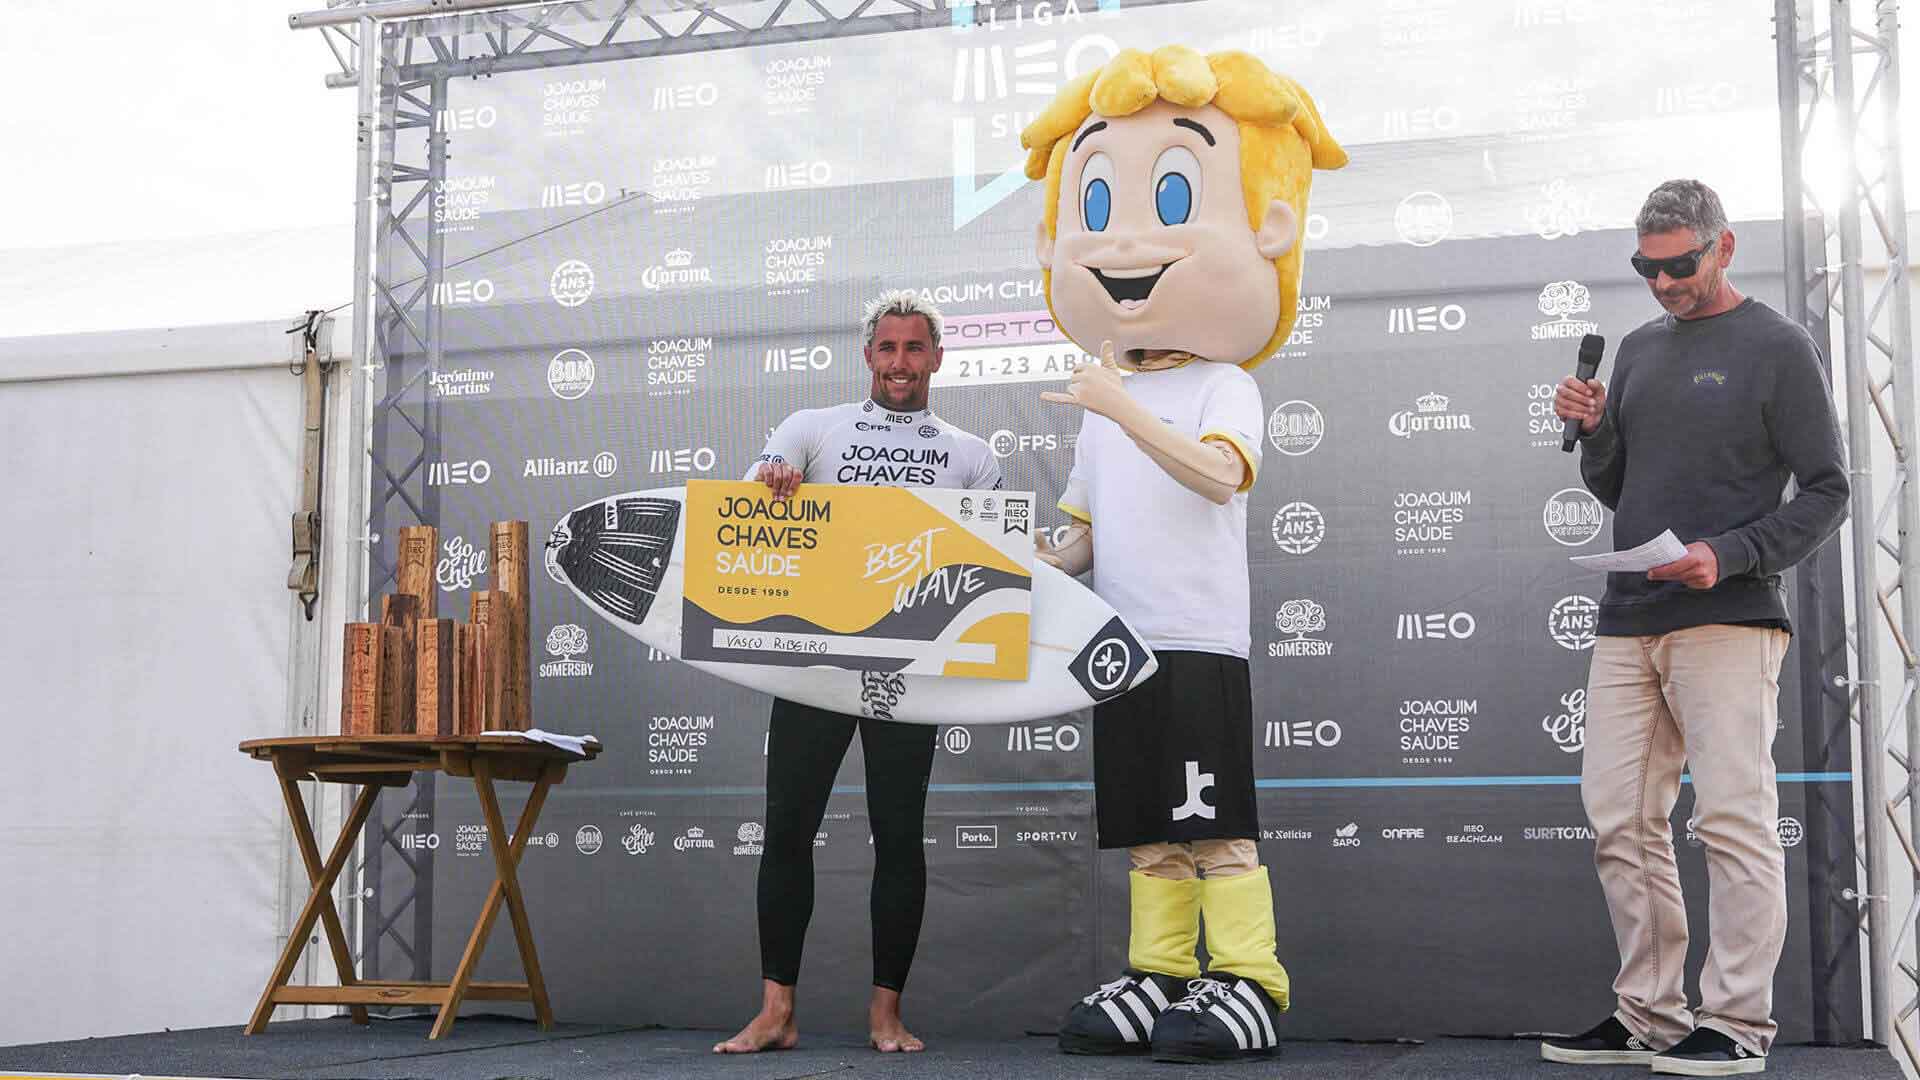 MEO Surf League stage with surfer and mascot Joaquim Chaves Saúde